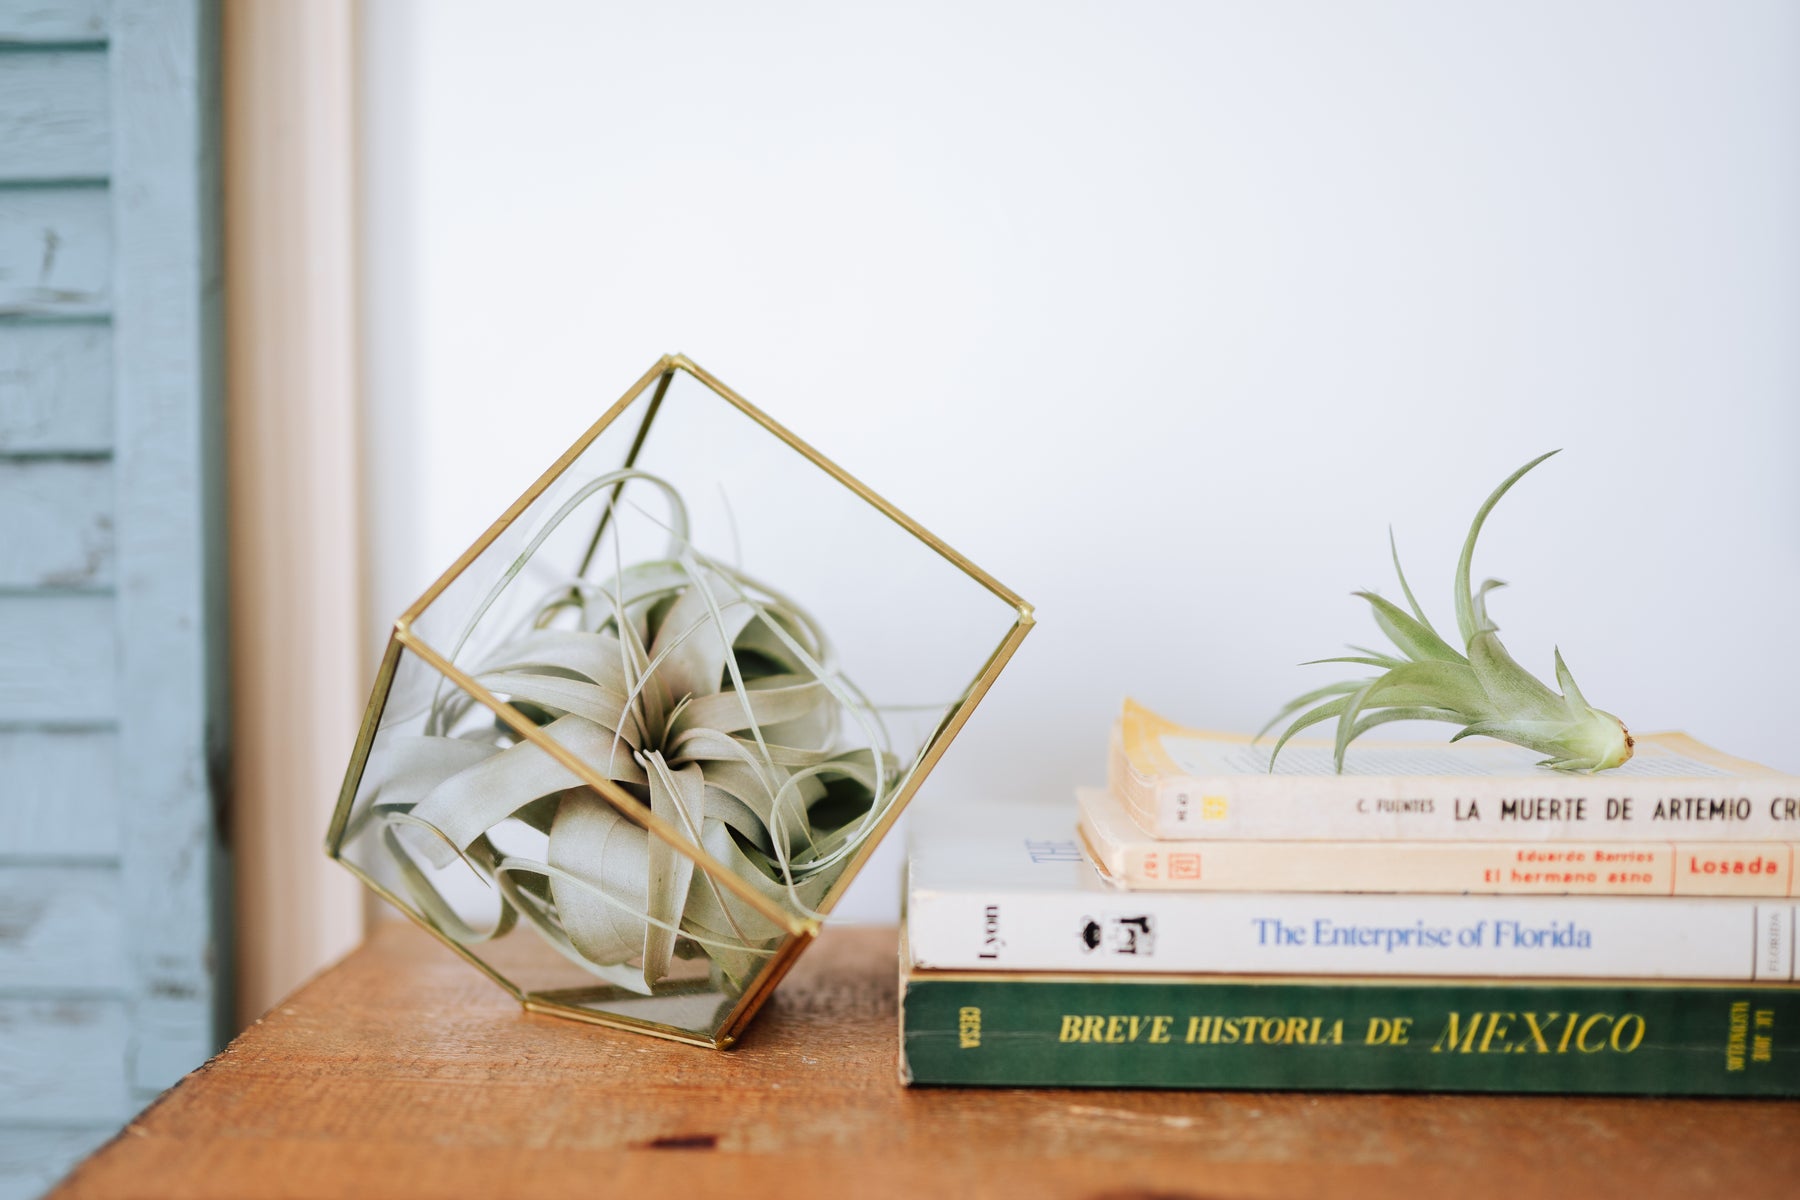 Tillandsia Air Plants Displays on a Shelf with Books